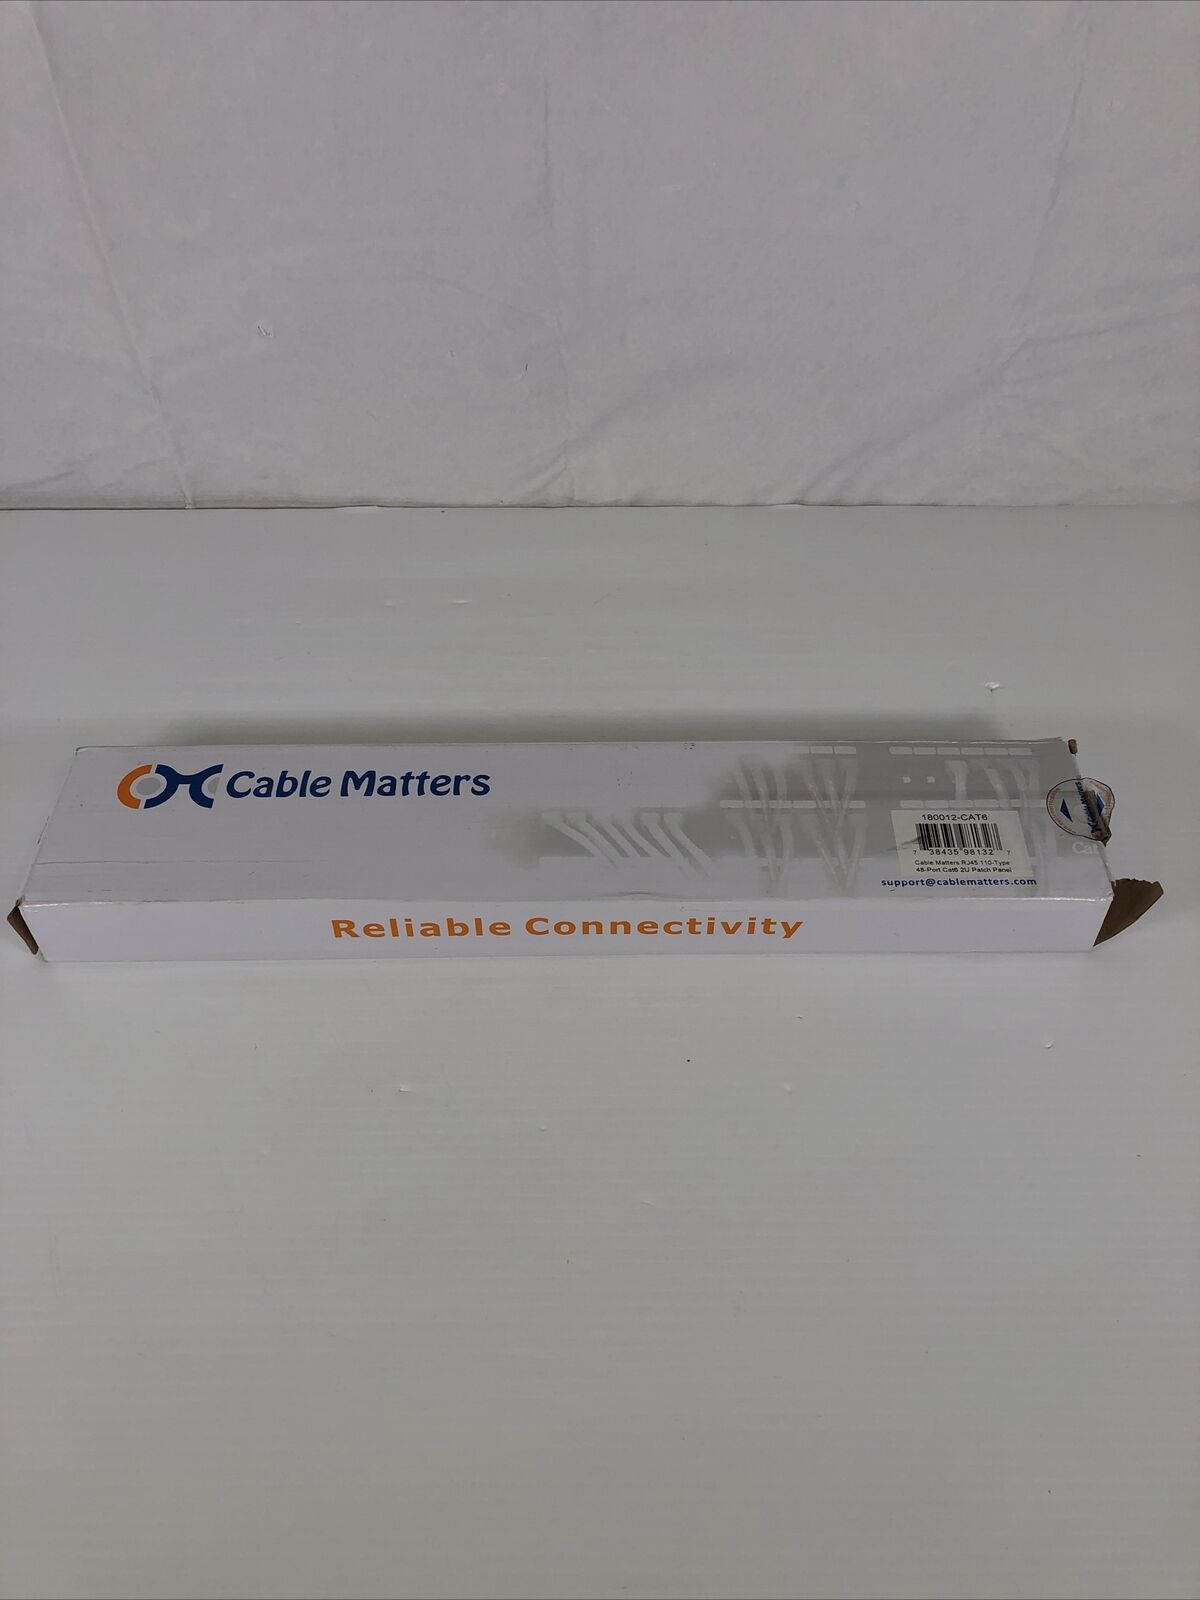 Cable matters RJ45 110 type 12 port cat6 vertical mini patch panel. Sealed